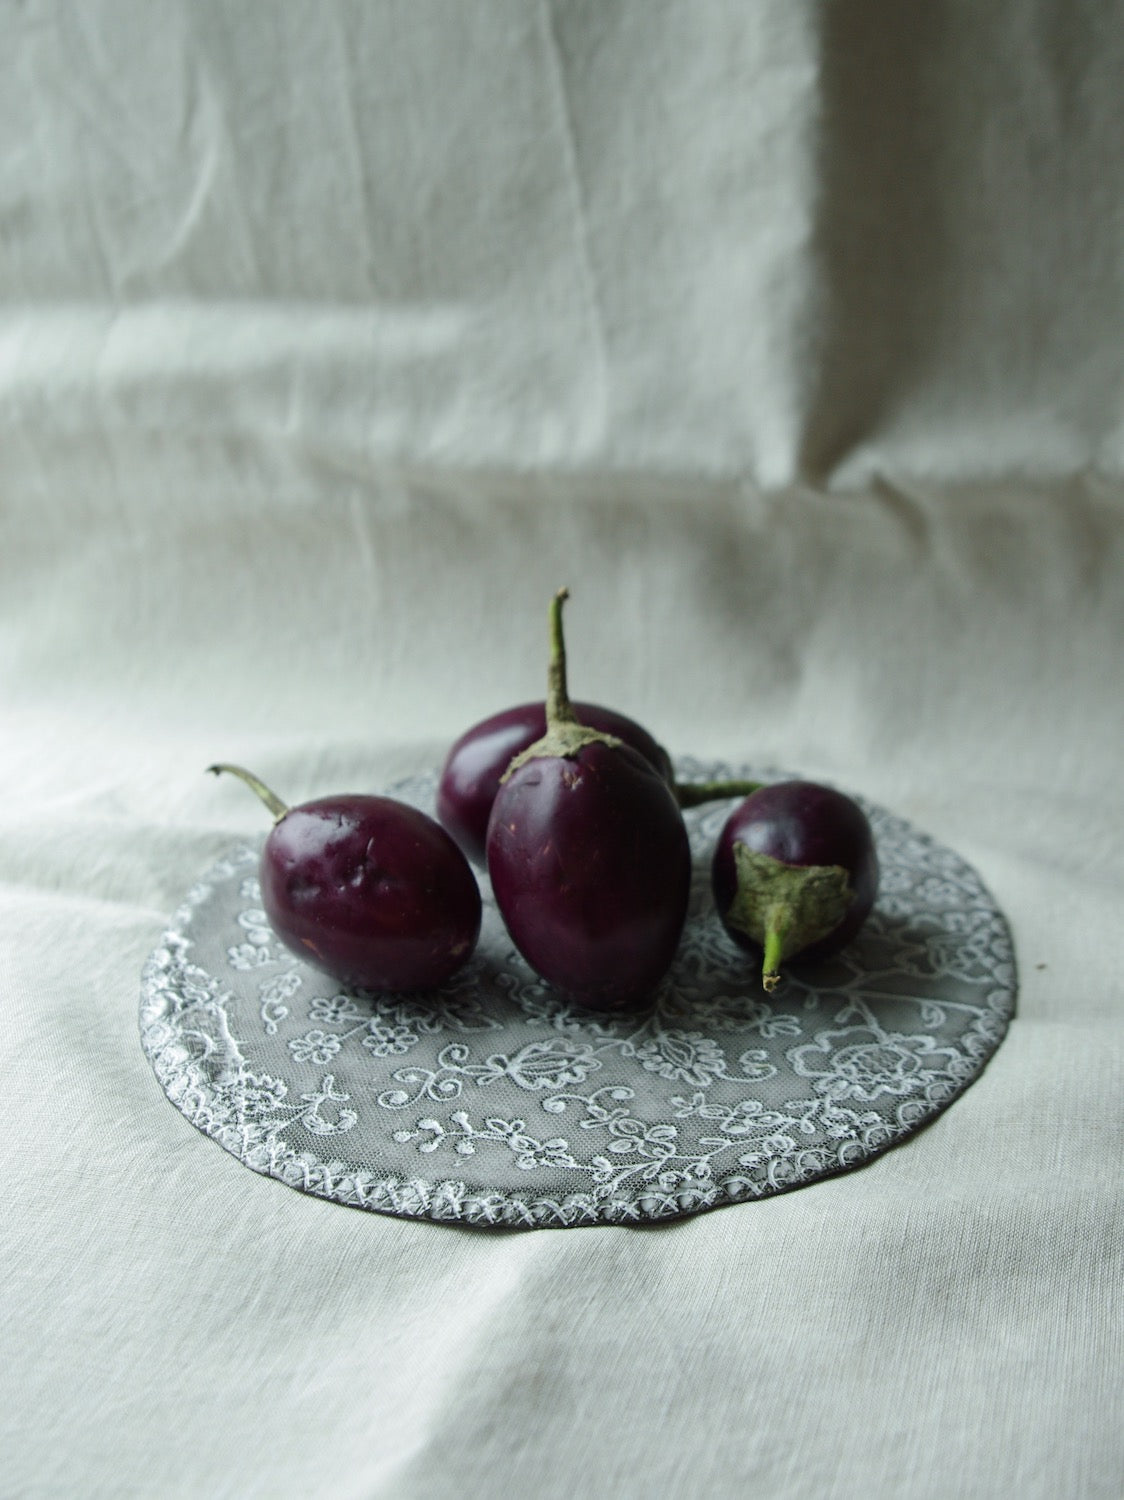 Baby eggplants sitting on lace pattern ceramic plate